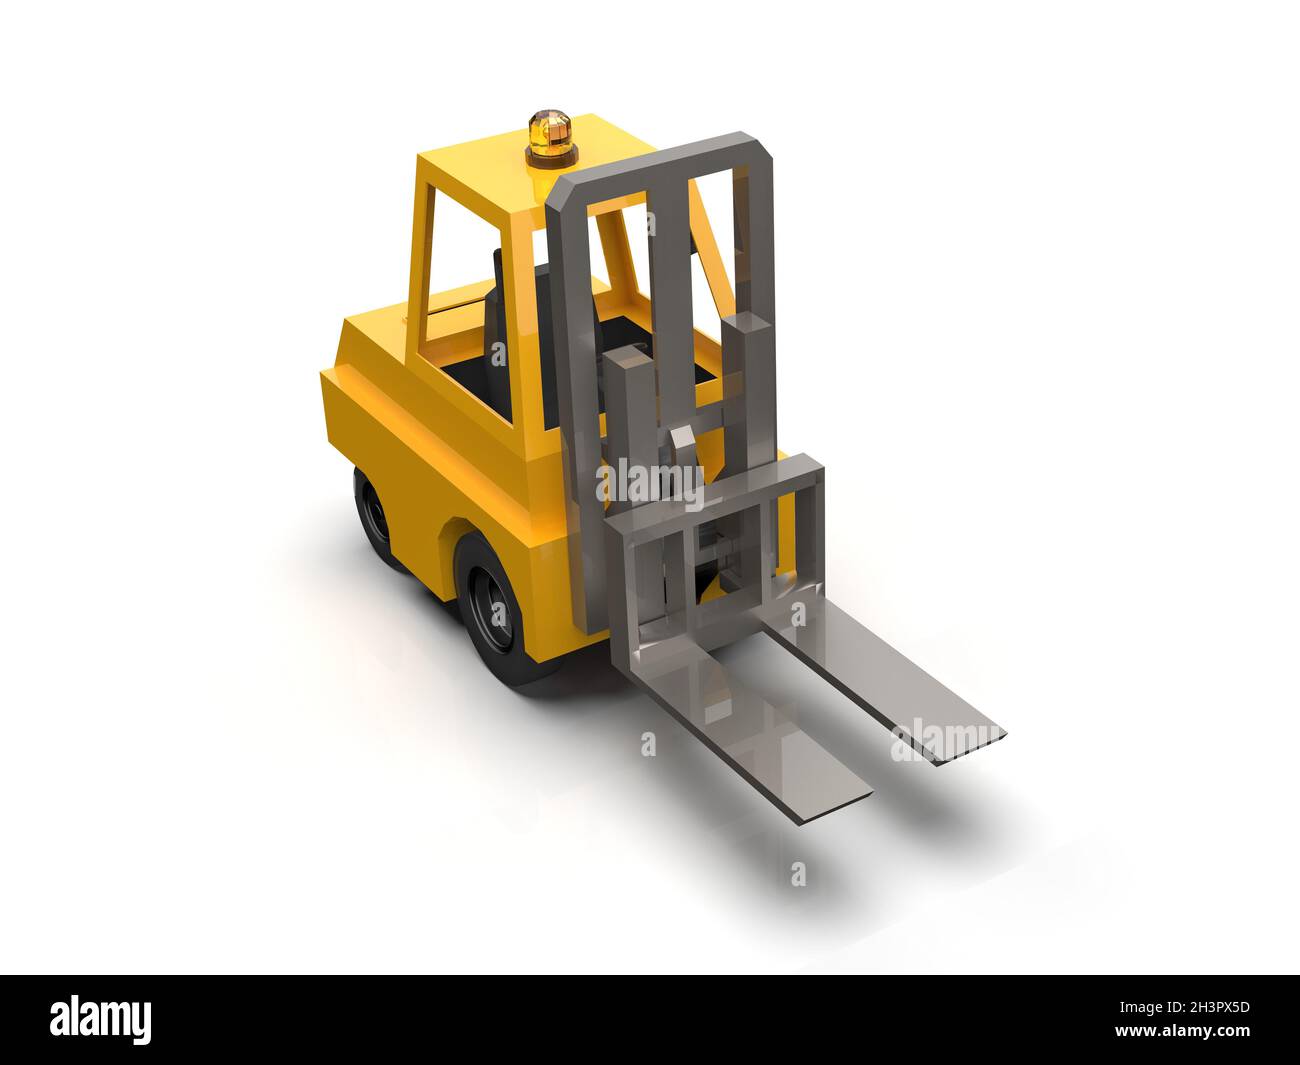 3d Lowpoly Icon Forklift Truck Loader Cartoon Style Isolated on White Background Stock Photo